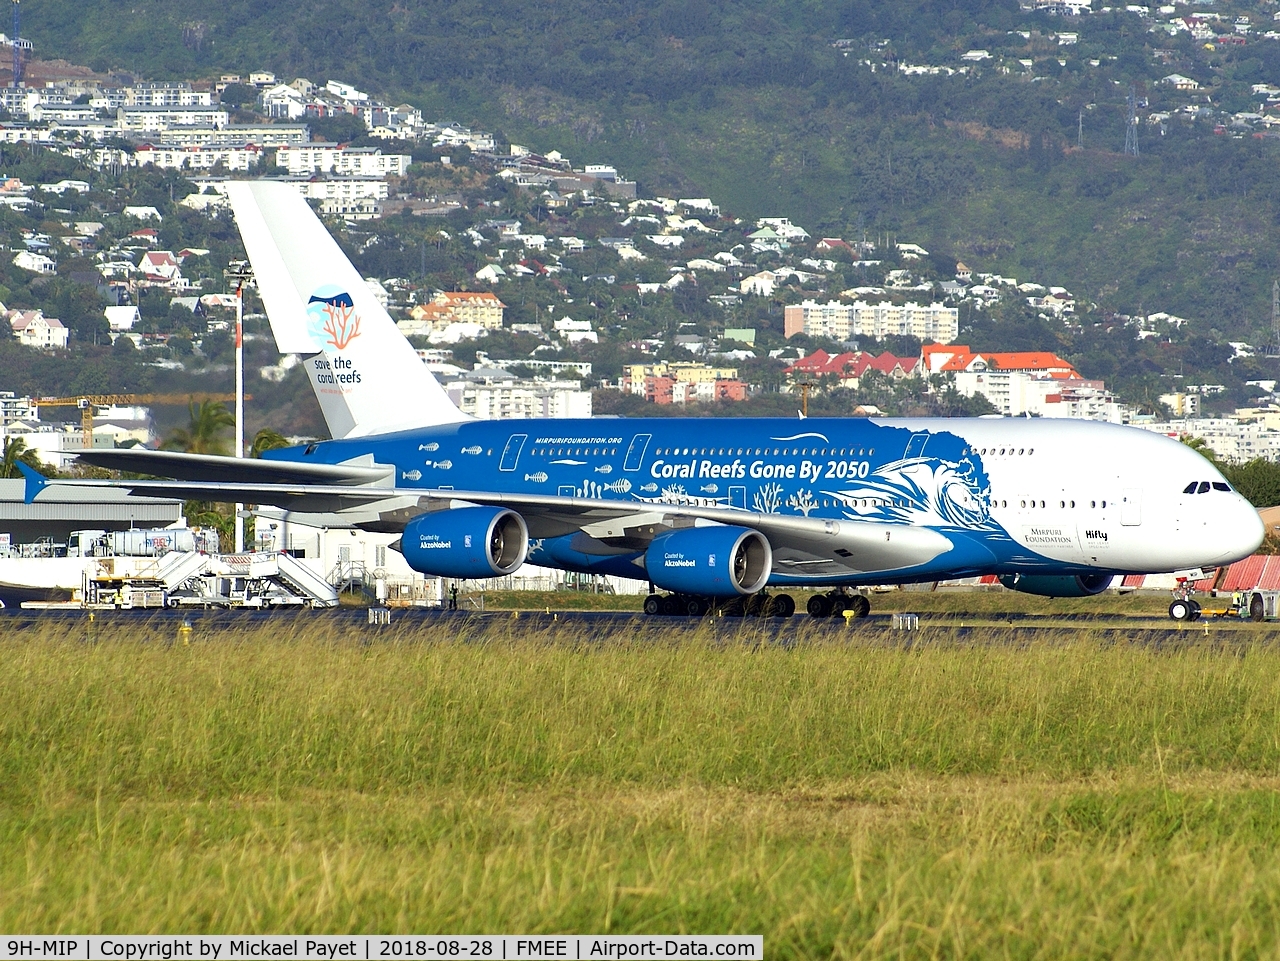 9H-MIP, 2006 Airbus A380-841 C/N 006, Flying for Air Austral